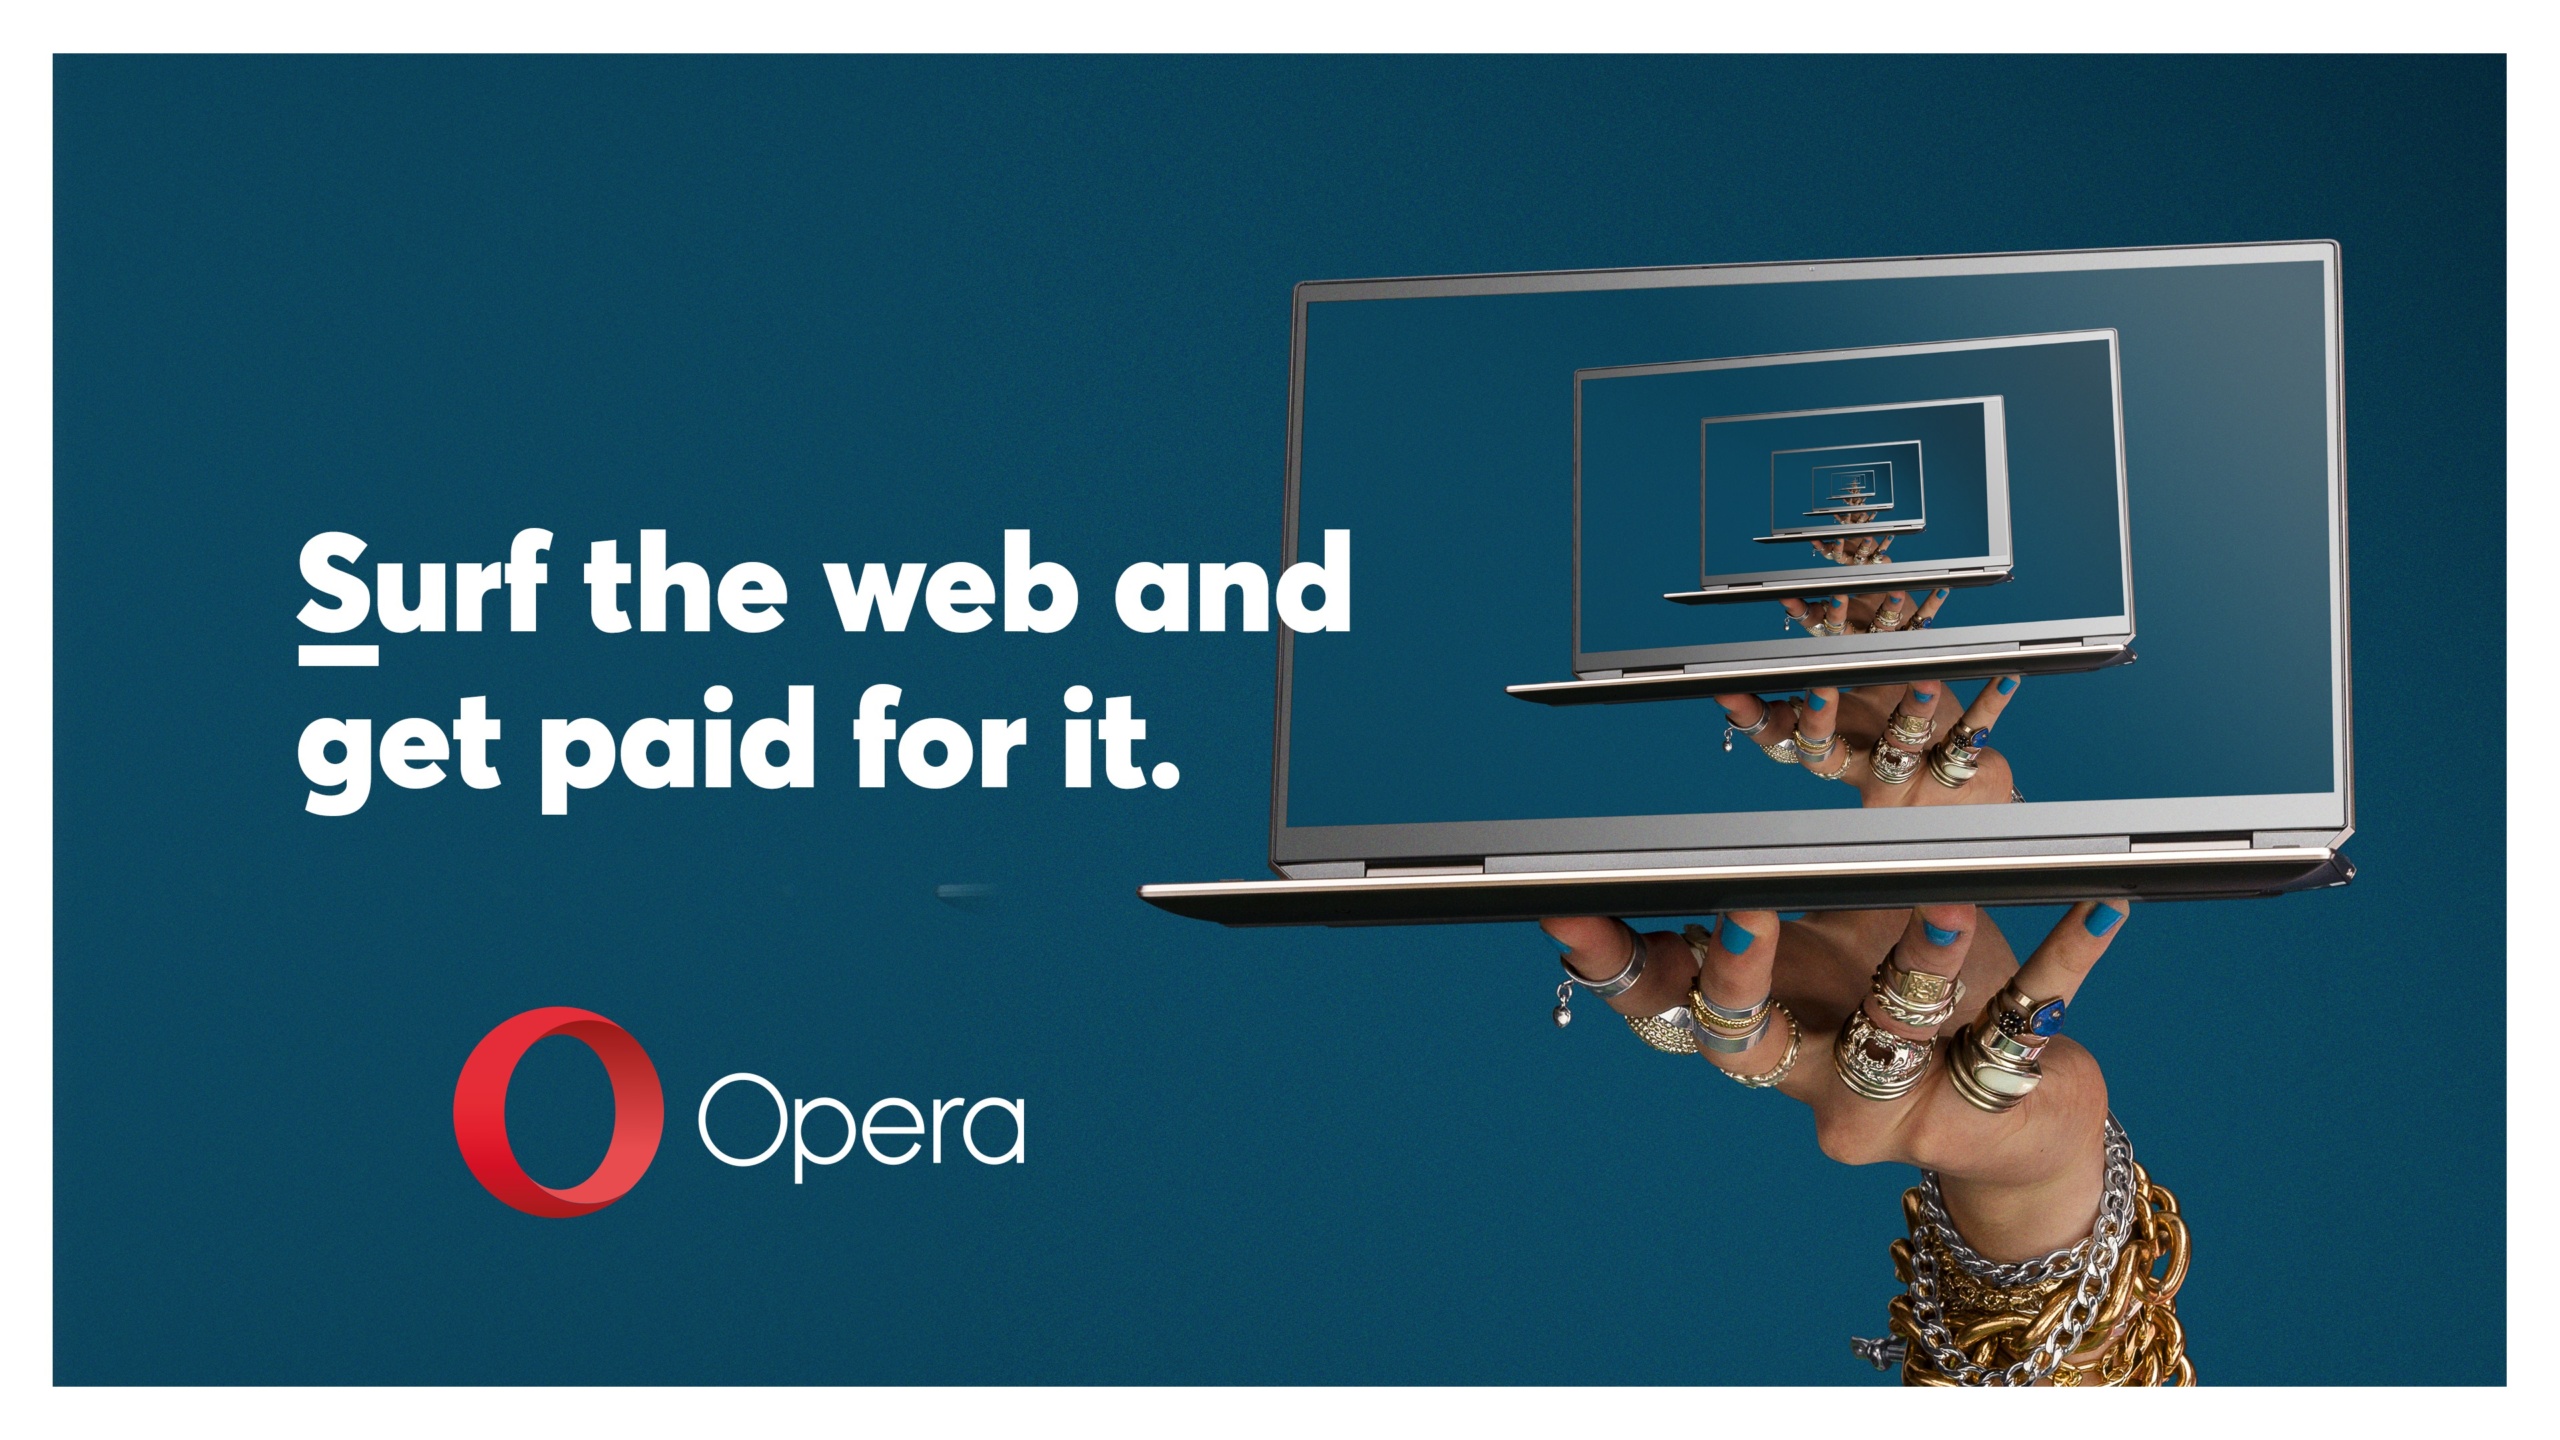 Opera is looking for a person to browse the web for fun